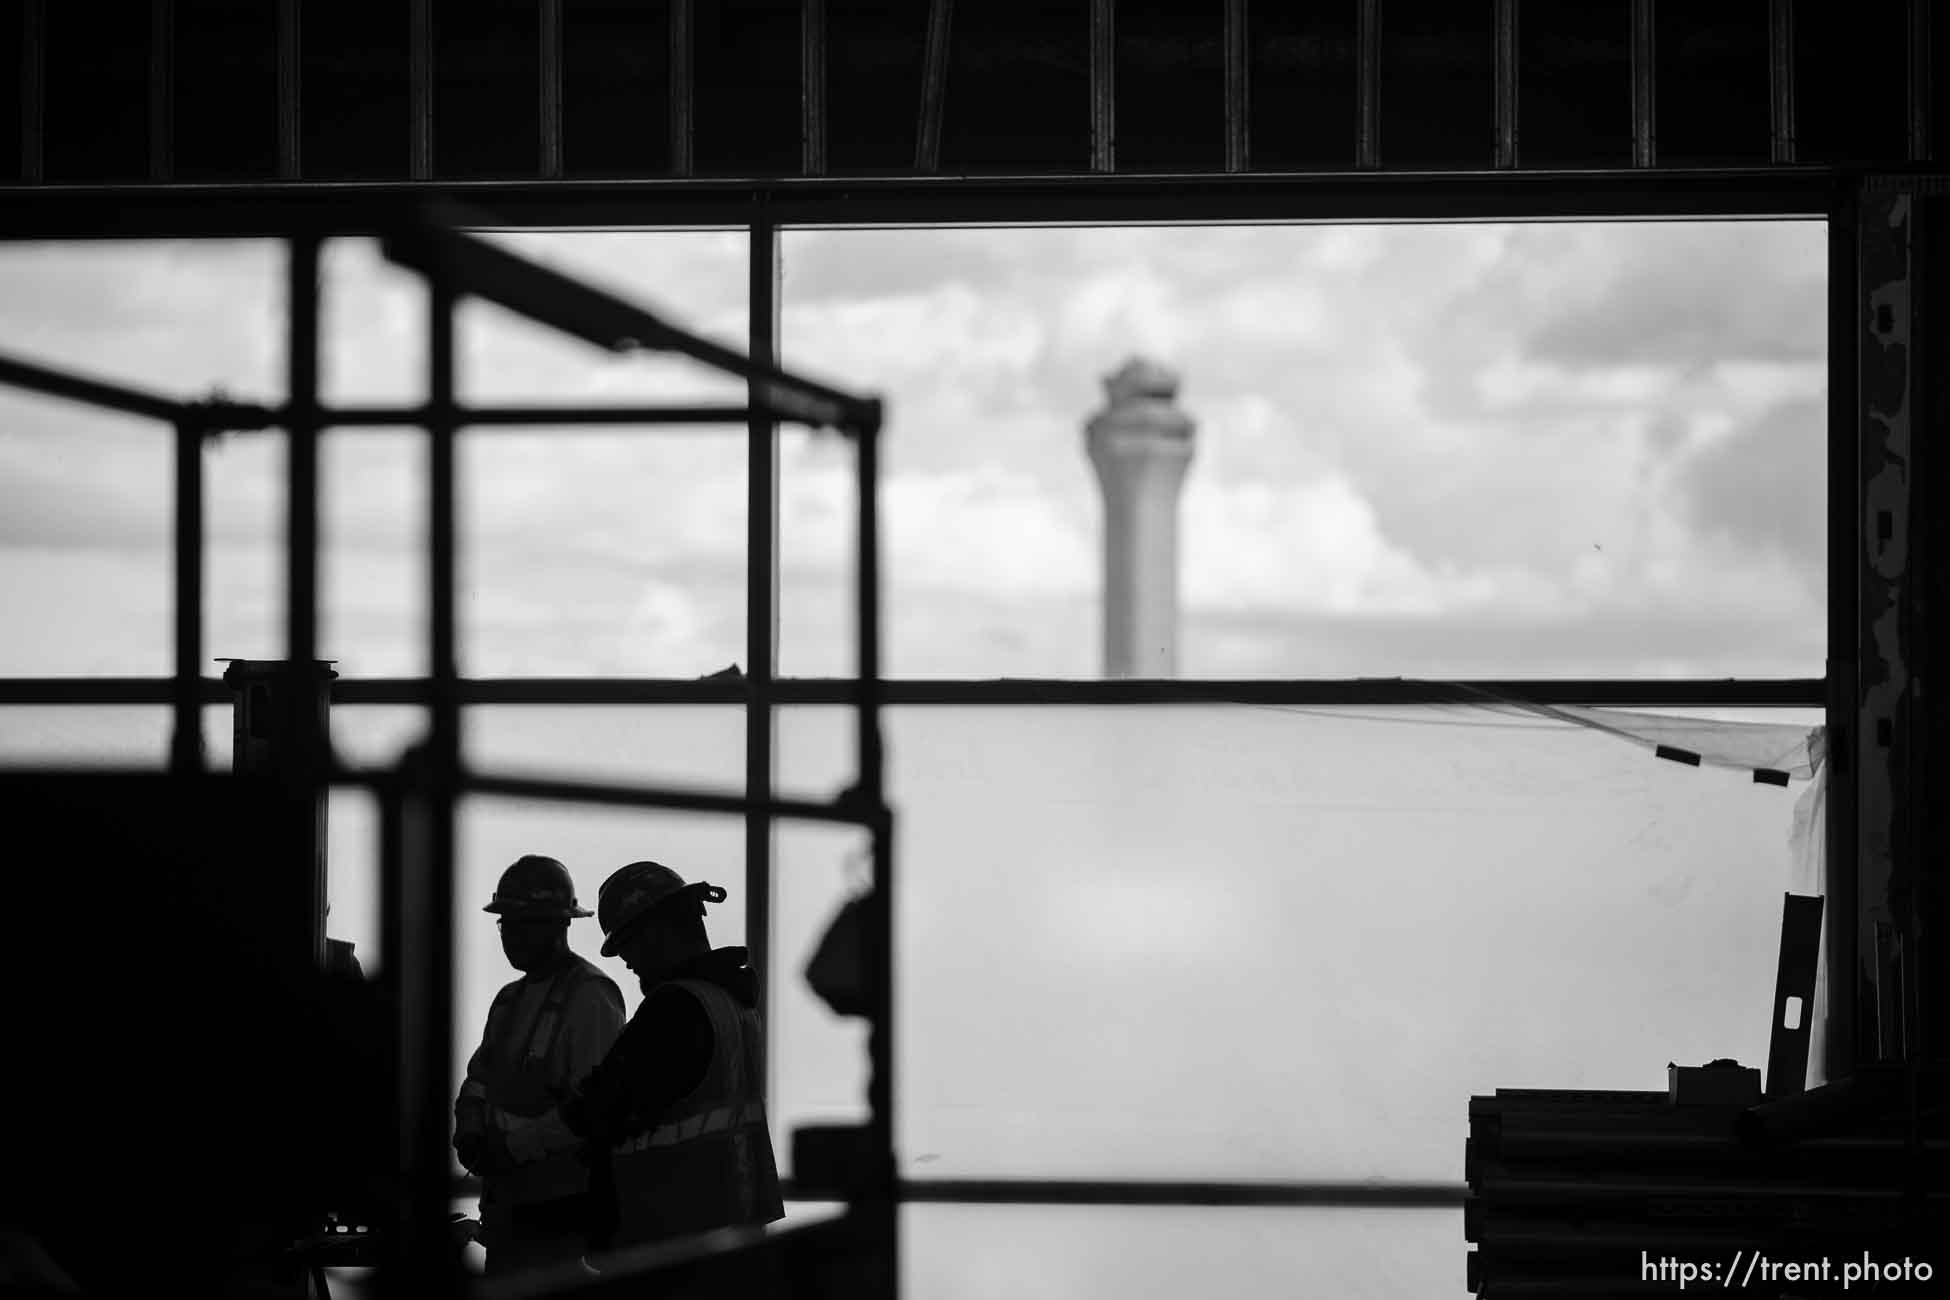 (Trent Nelson  |  The Salt Lake Tribune) Construction along Concourse A East at the Salt Lake City International Airport in Salt Lake City on Tuesday, May 3, 2022.